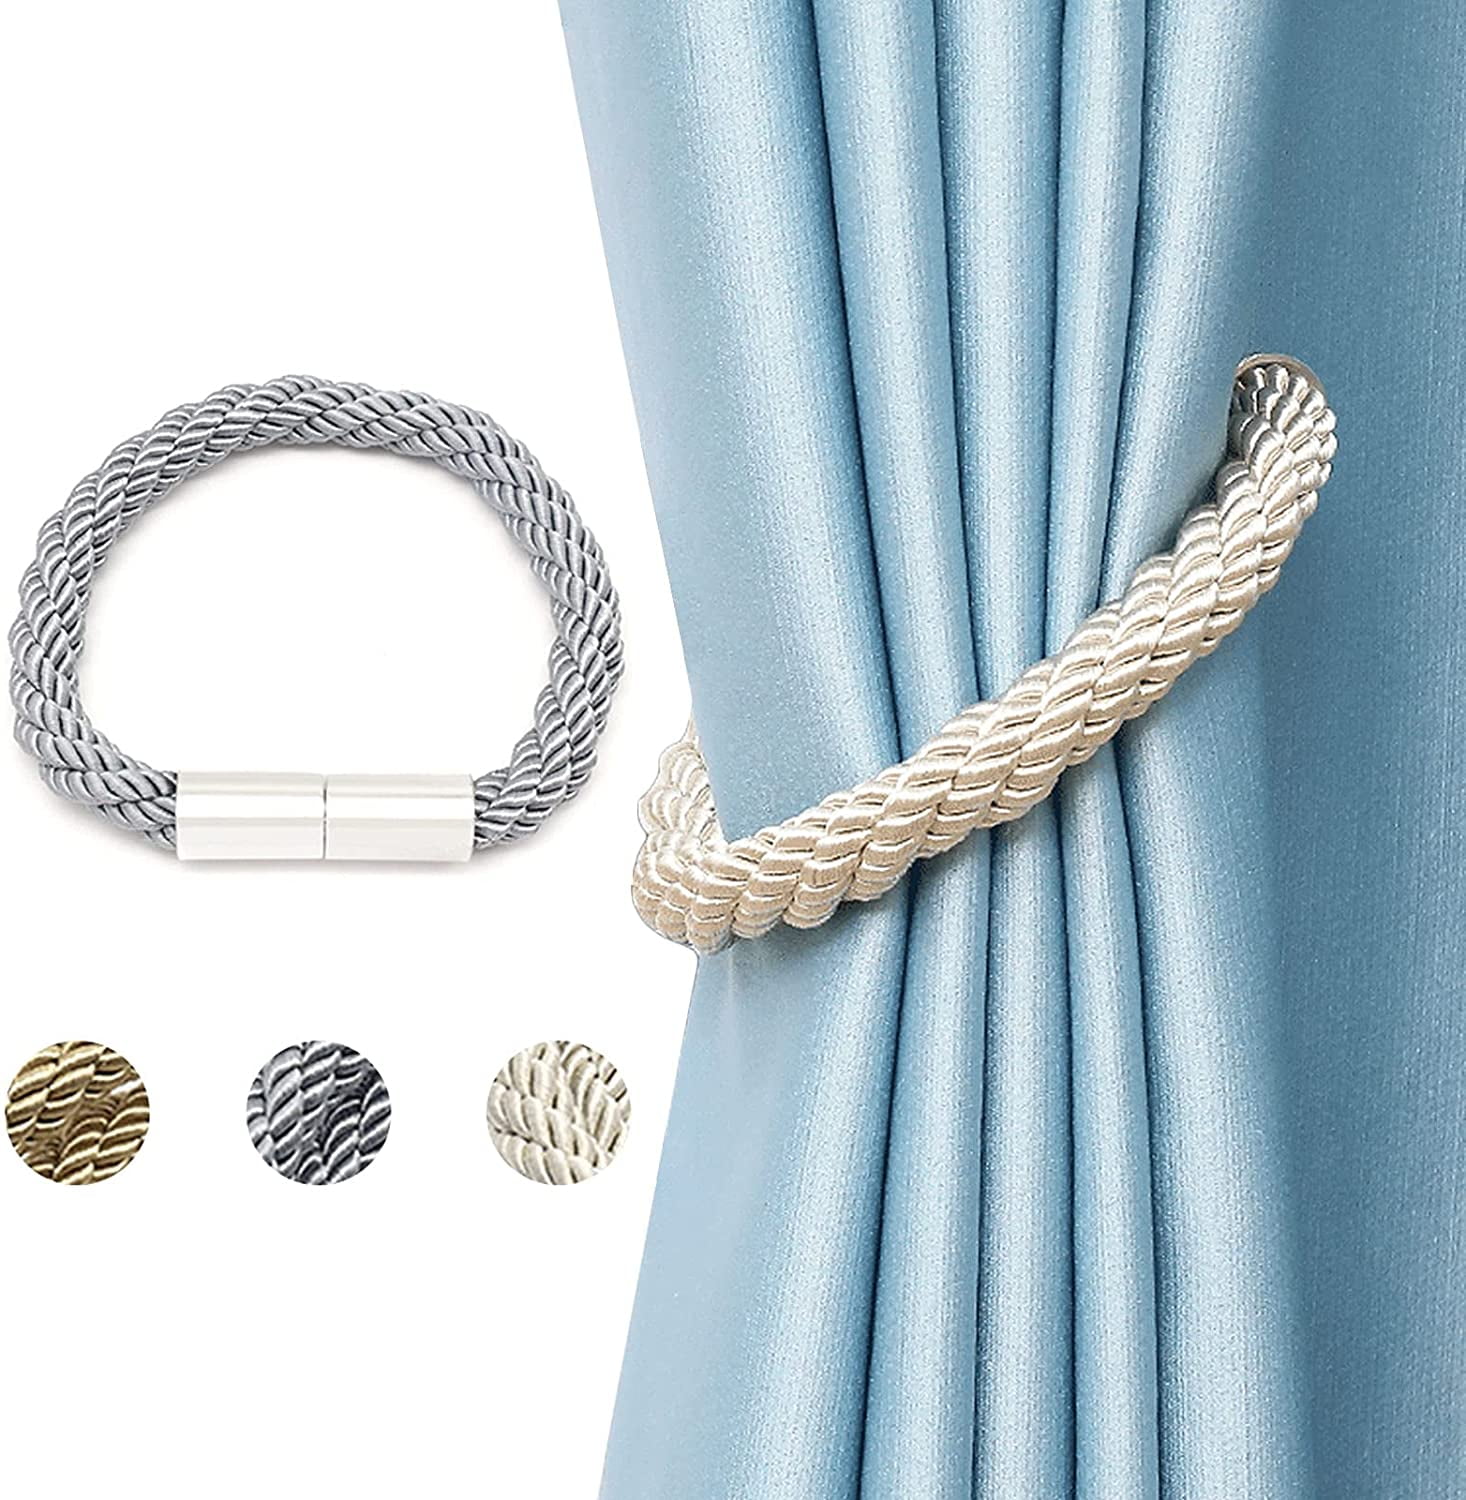 Details about   Magnetic Curtain Tie Backs Curtain Holdbacks Buckle Clips Rope Straps Gray US 